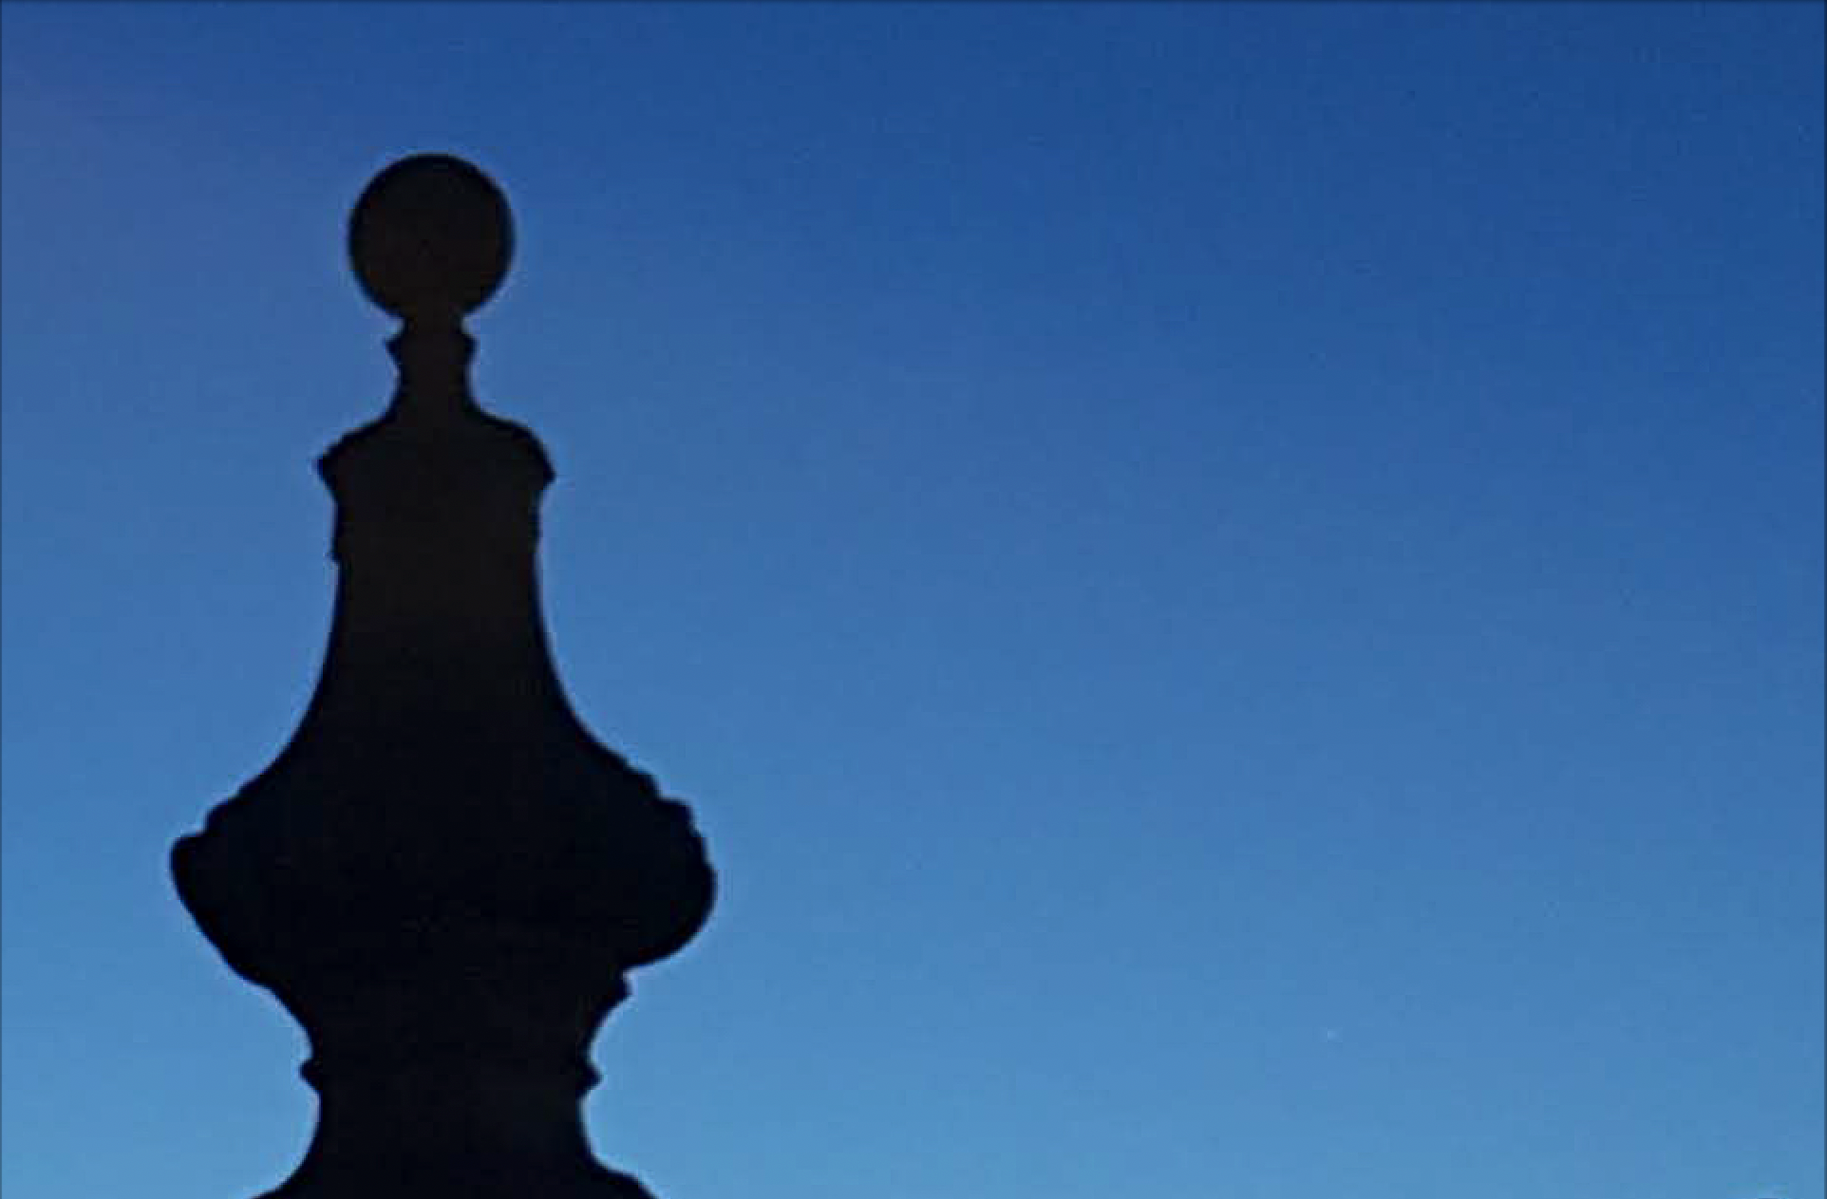 a dusky blue sky, against which is the silhouette of a symmetrical shape (the top of an embellished stone gate) - it looks a little like a pawn in chess.